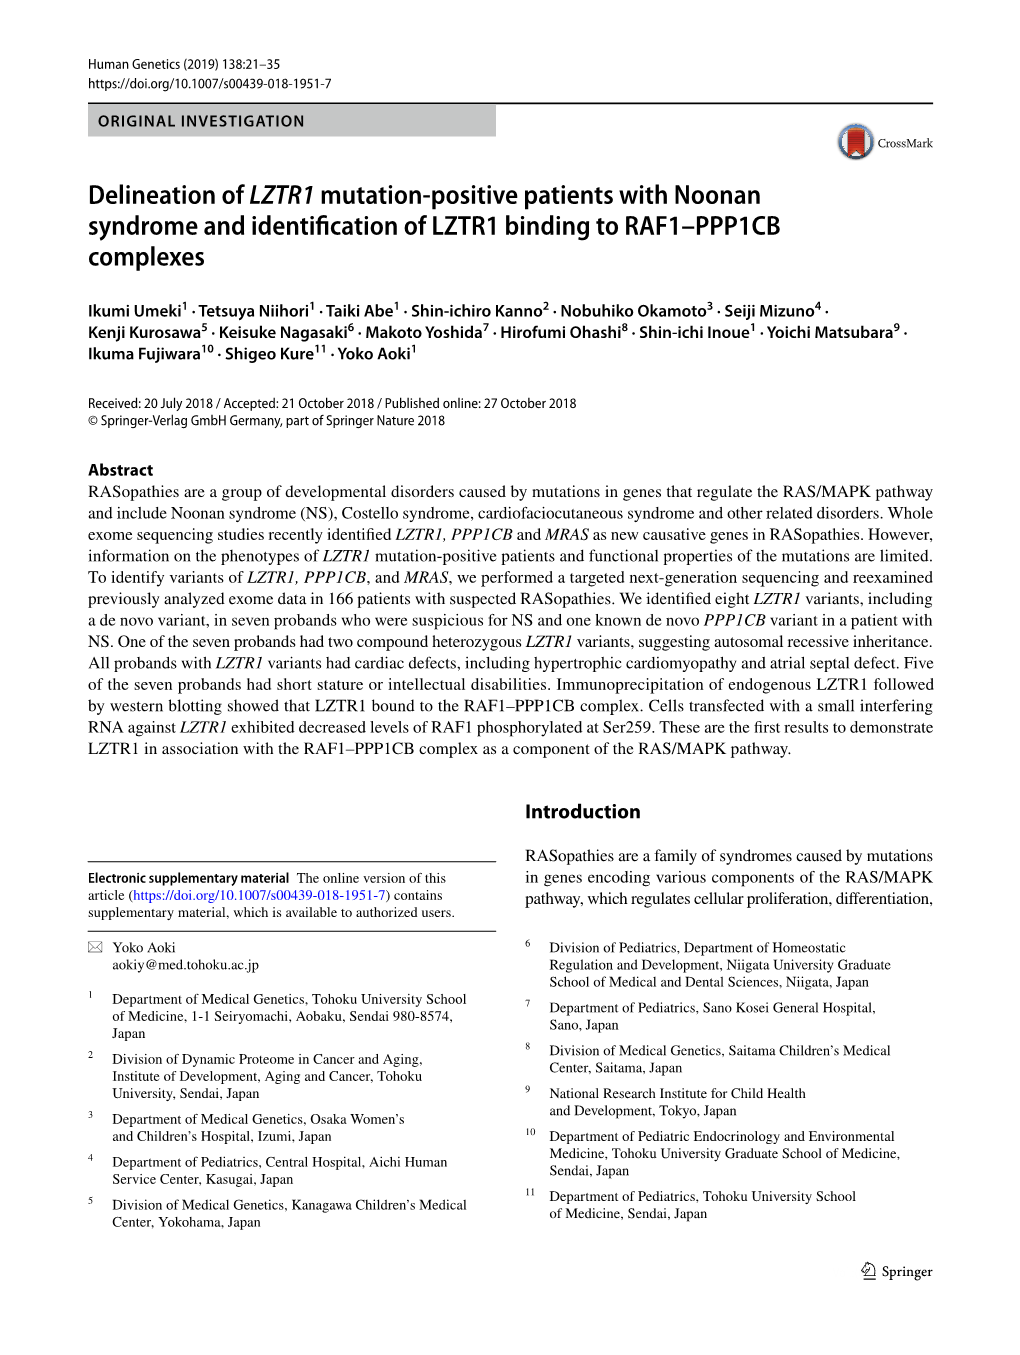 Delineation of LZTR1 Mutation-Positive Patients with Noonan Syndrome and Identification of LZTR1 Binding to RAF1–PPP1CB Complexes